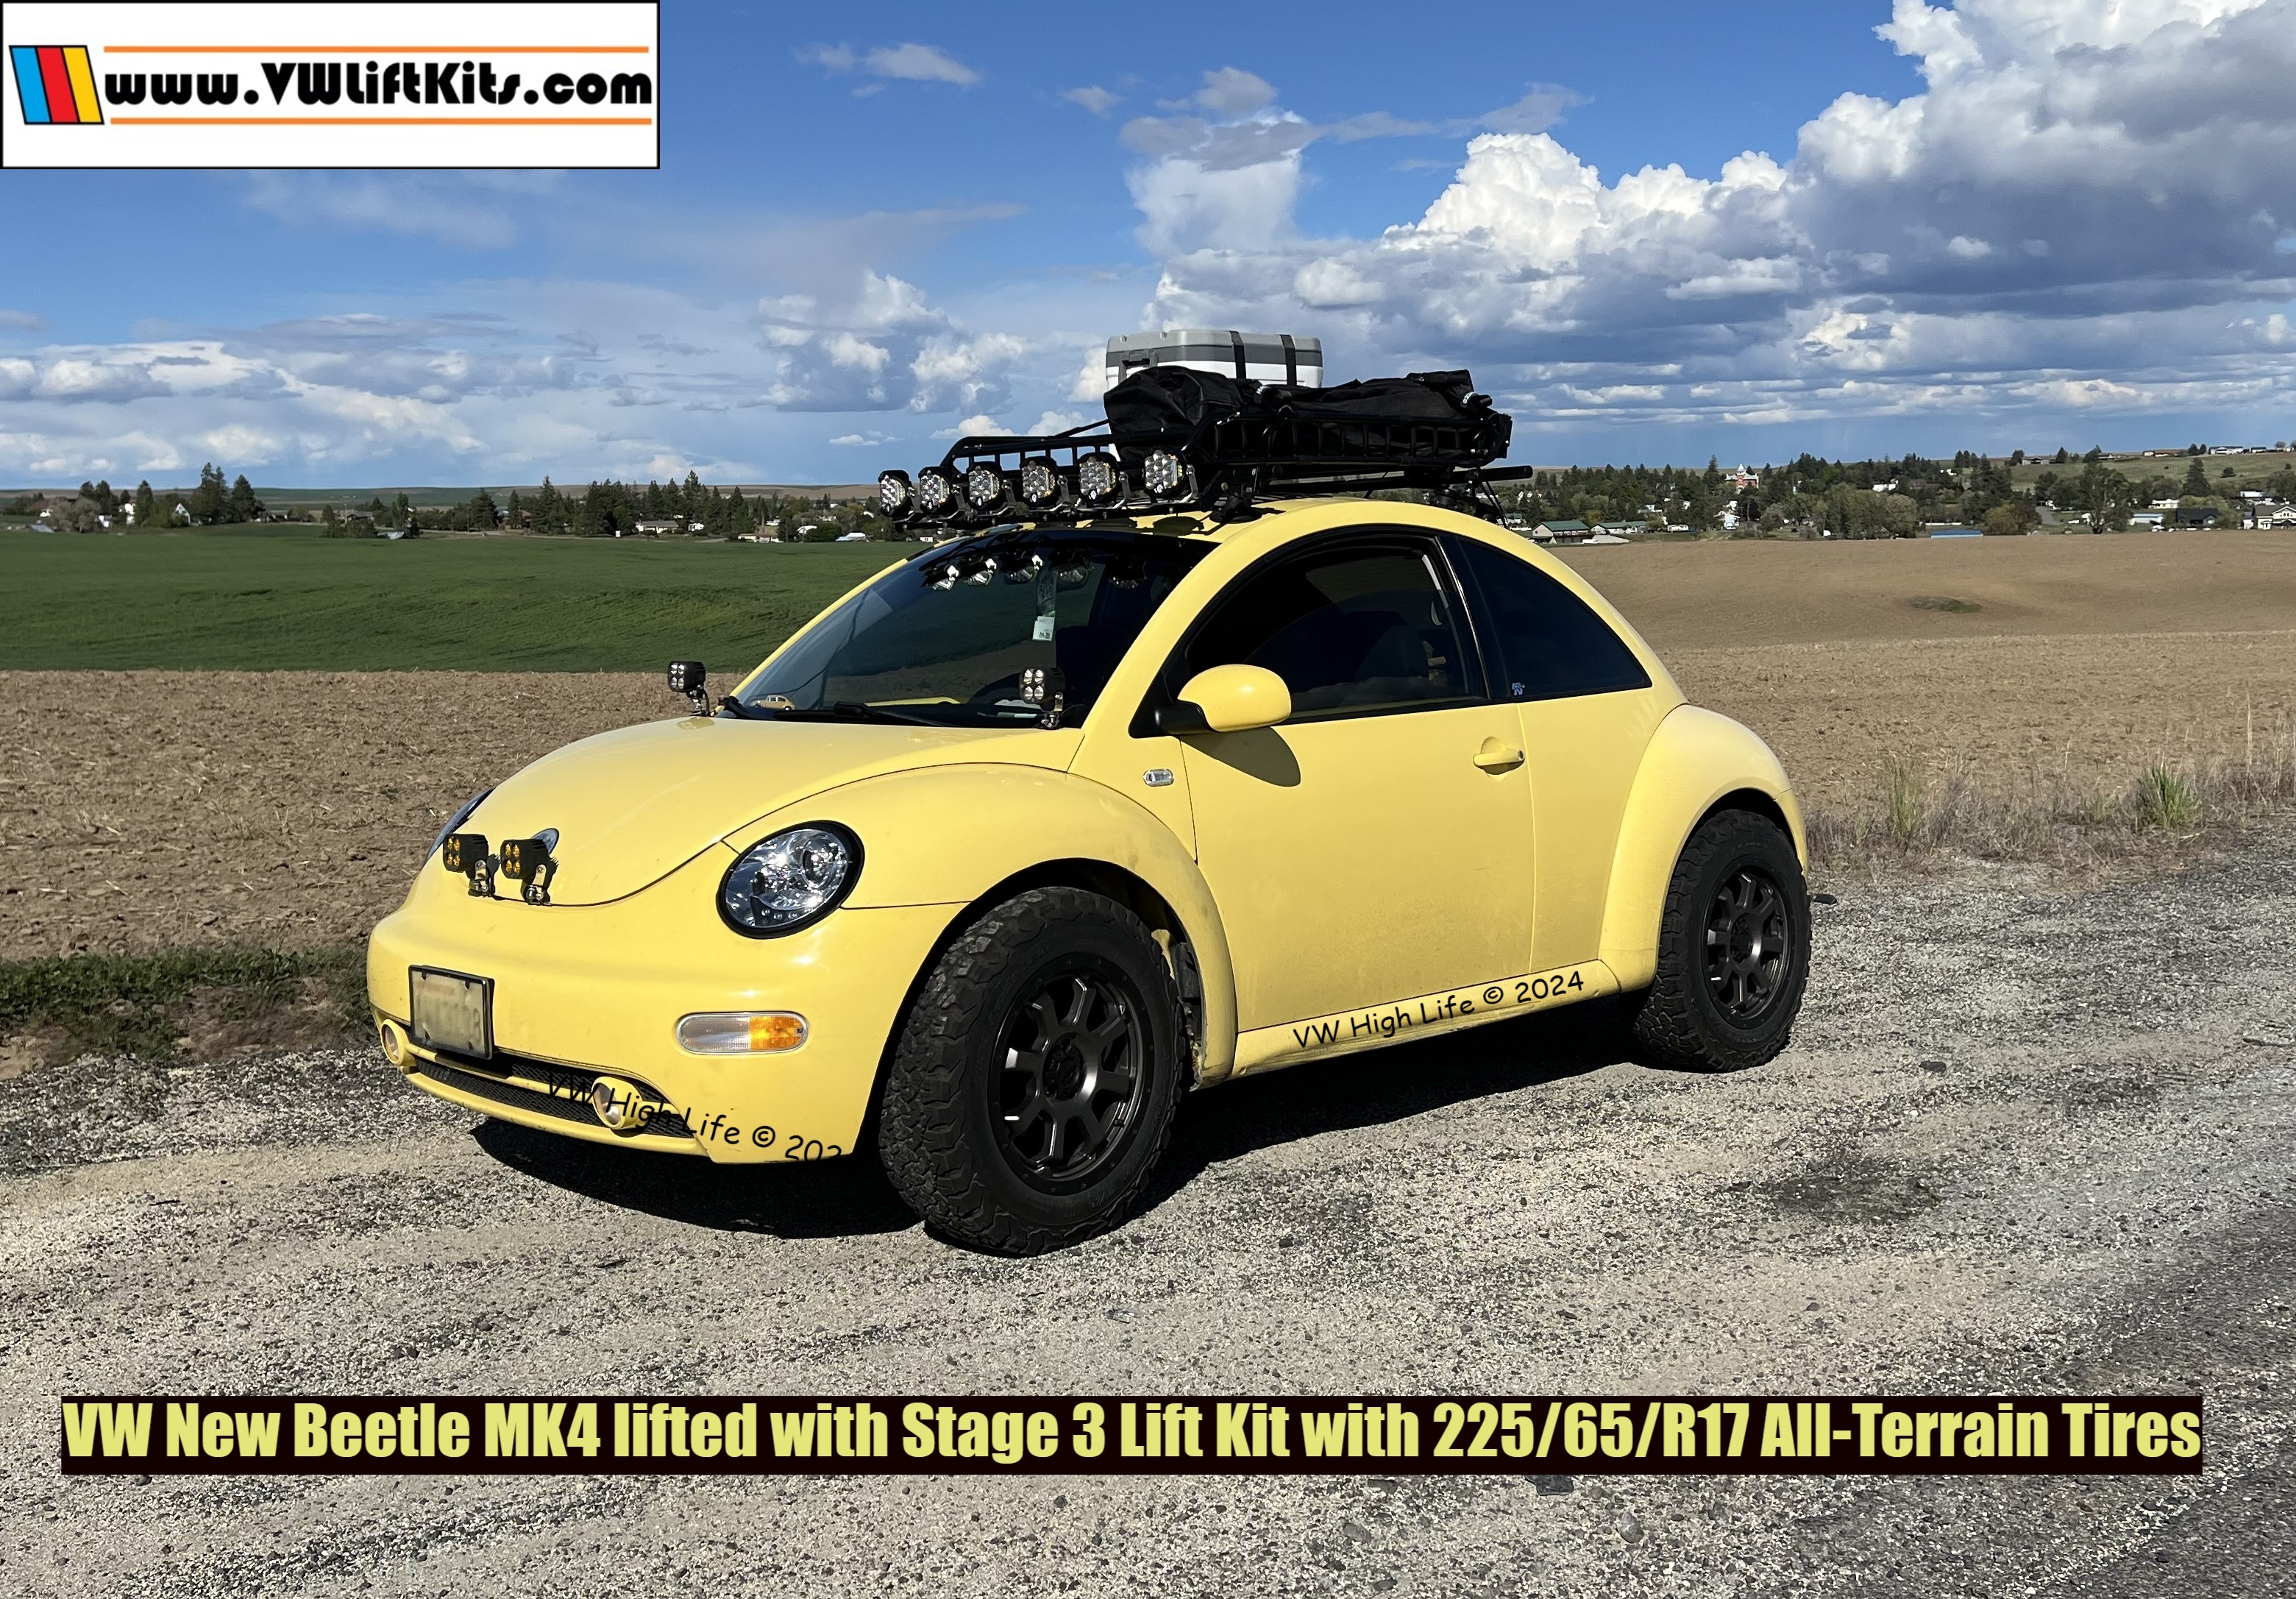 Preston properly lifted his Beetle using a Stage 3 Lift Kit to mount 28-inch all-terrain tires!